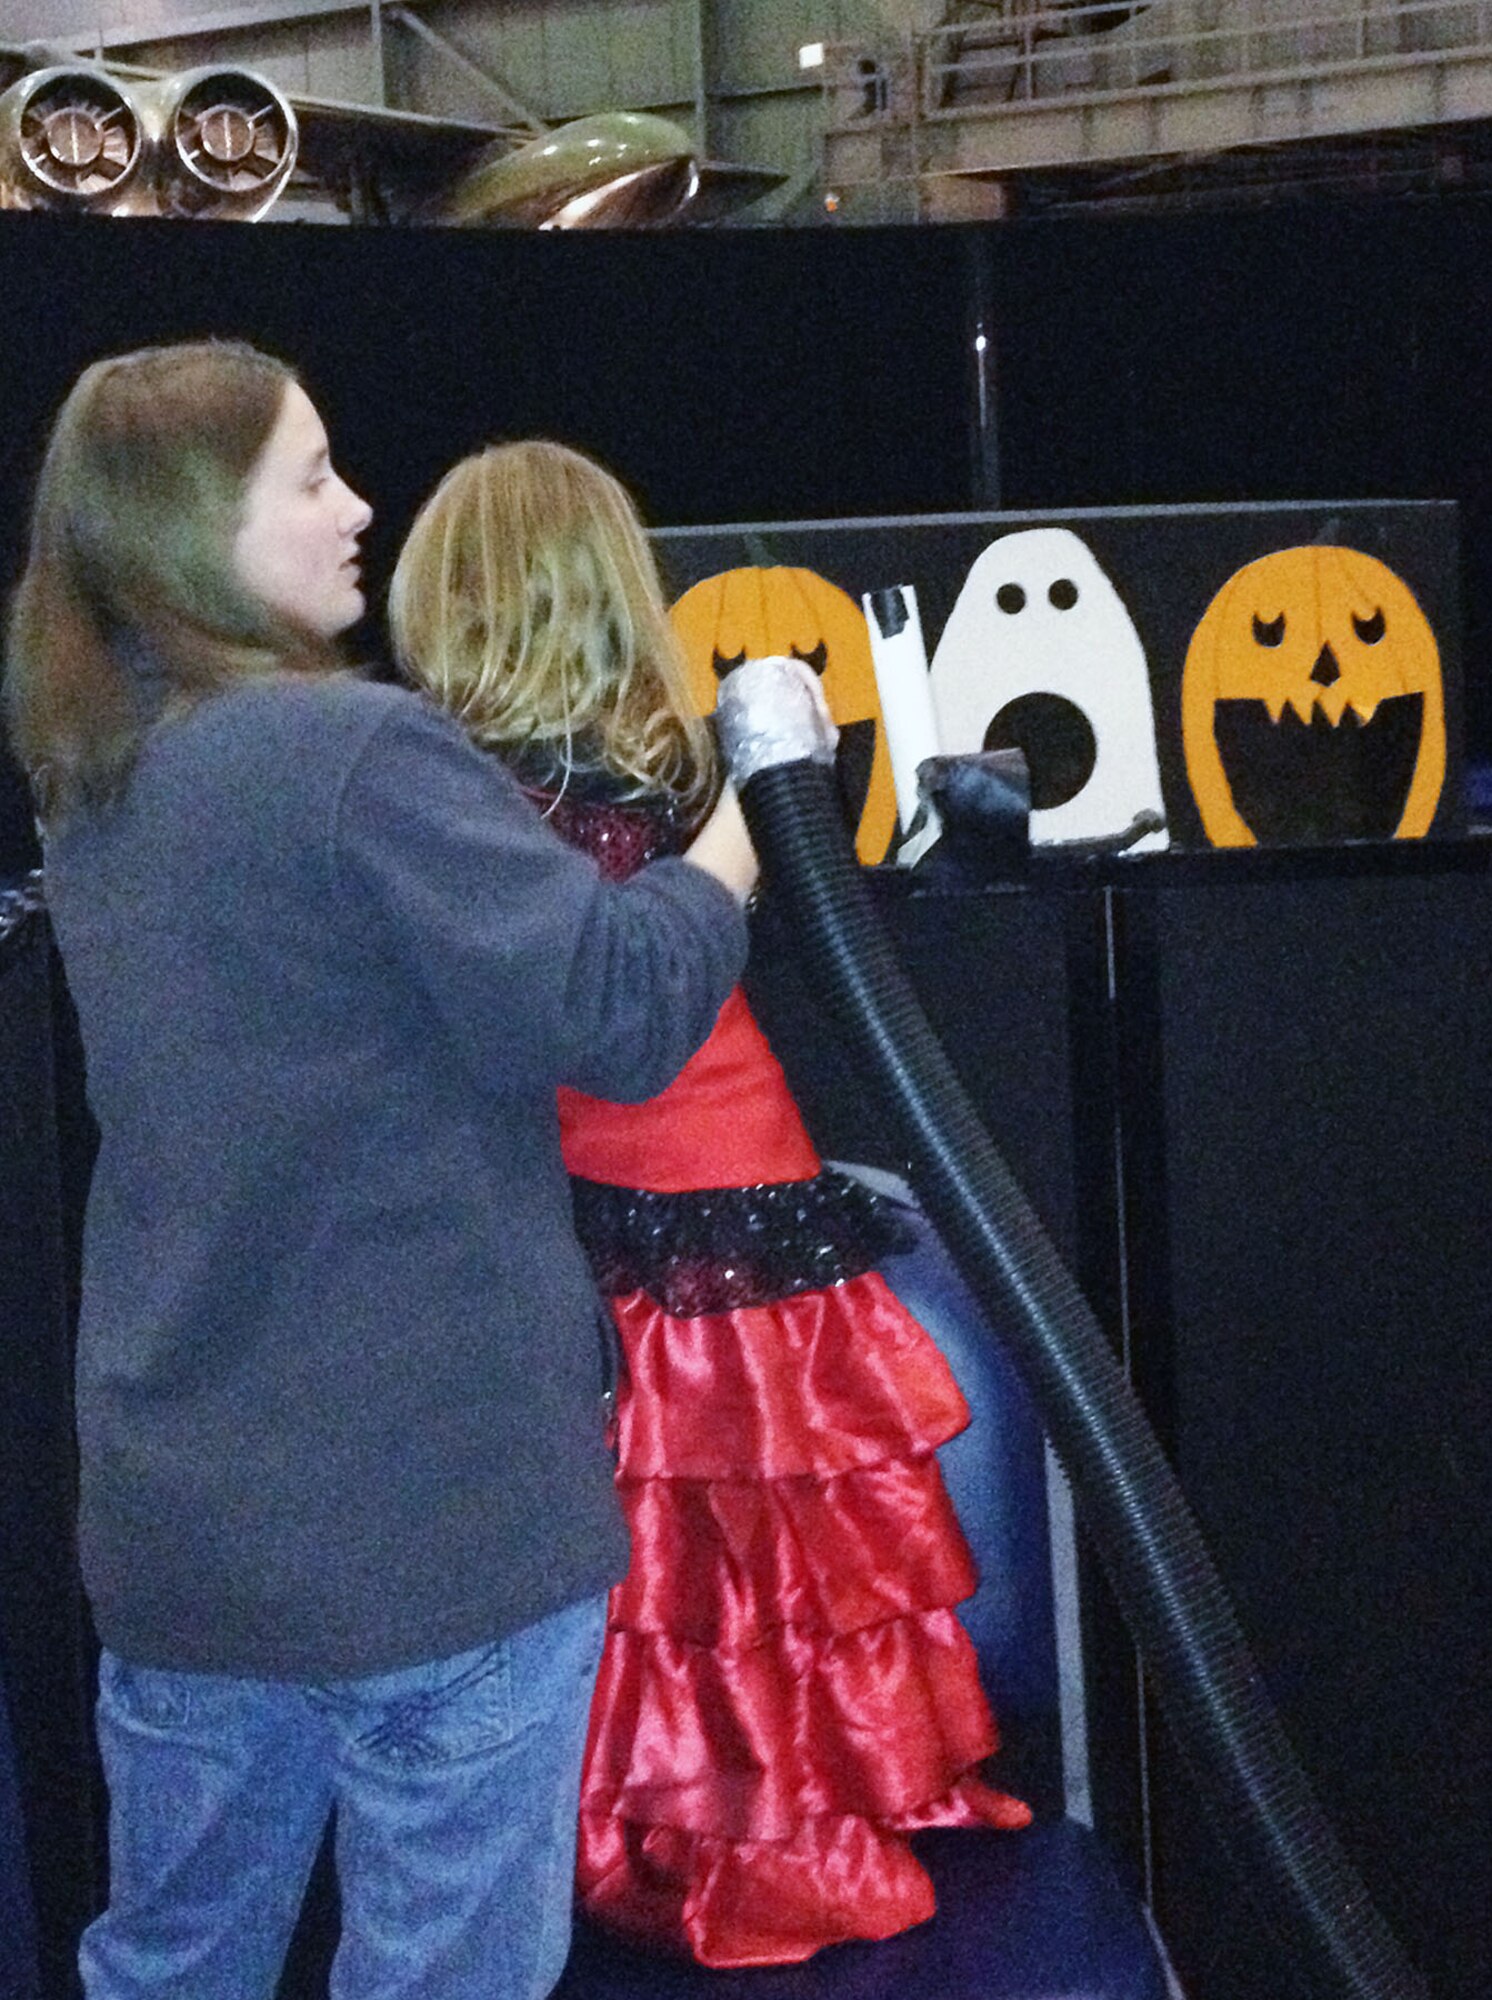 DAYTON, Ohio -- Museum visitors of all ages enjoyed learning about aerospace principles through Halloween-themed activities during Family Day at the National Museum of the U.S. Air Force. (U.S. Air Force photo)